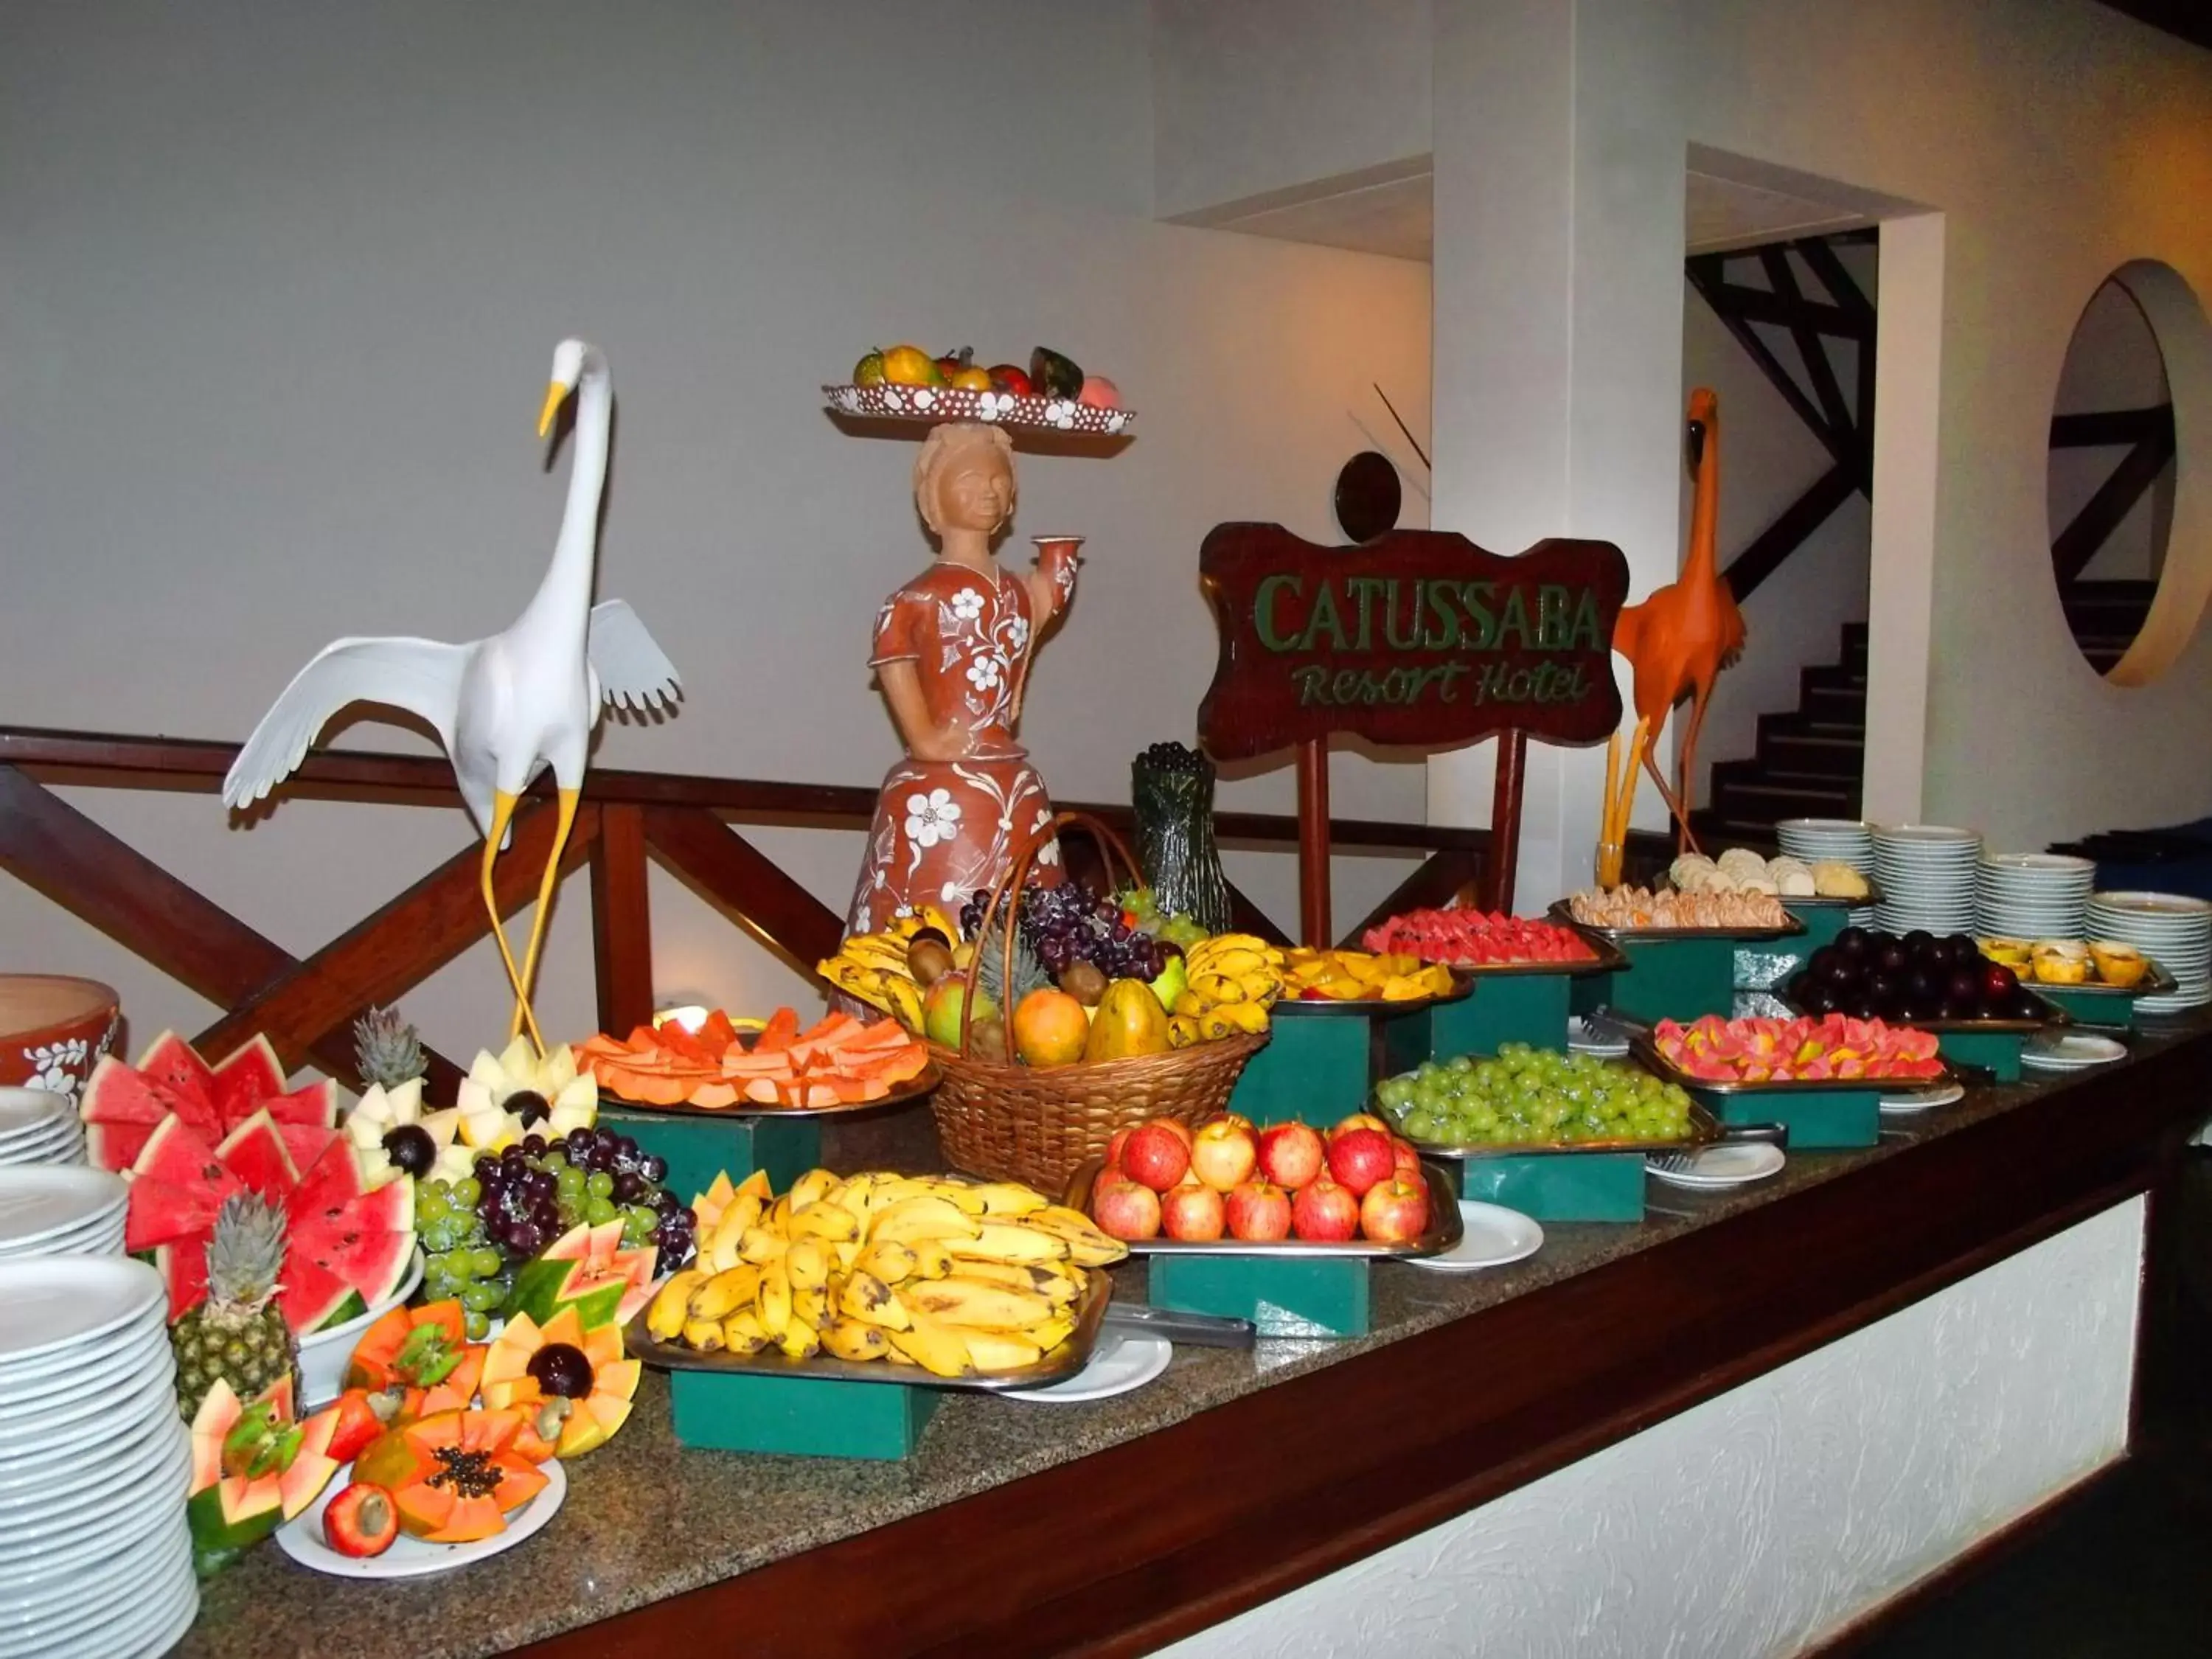 Food and drinks in Catussaba Resort Hotel